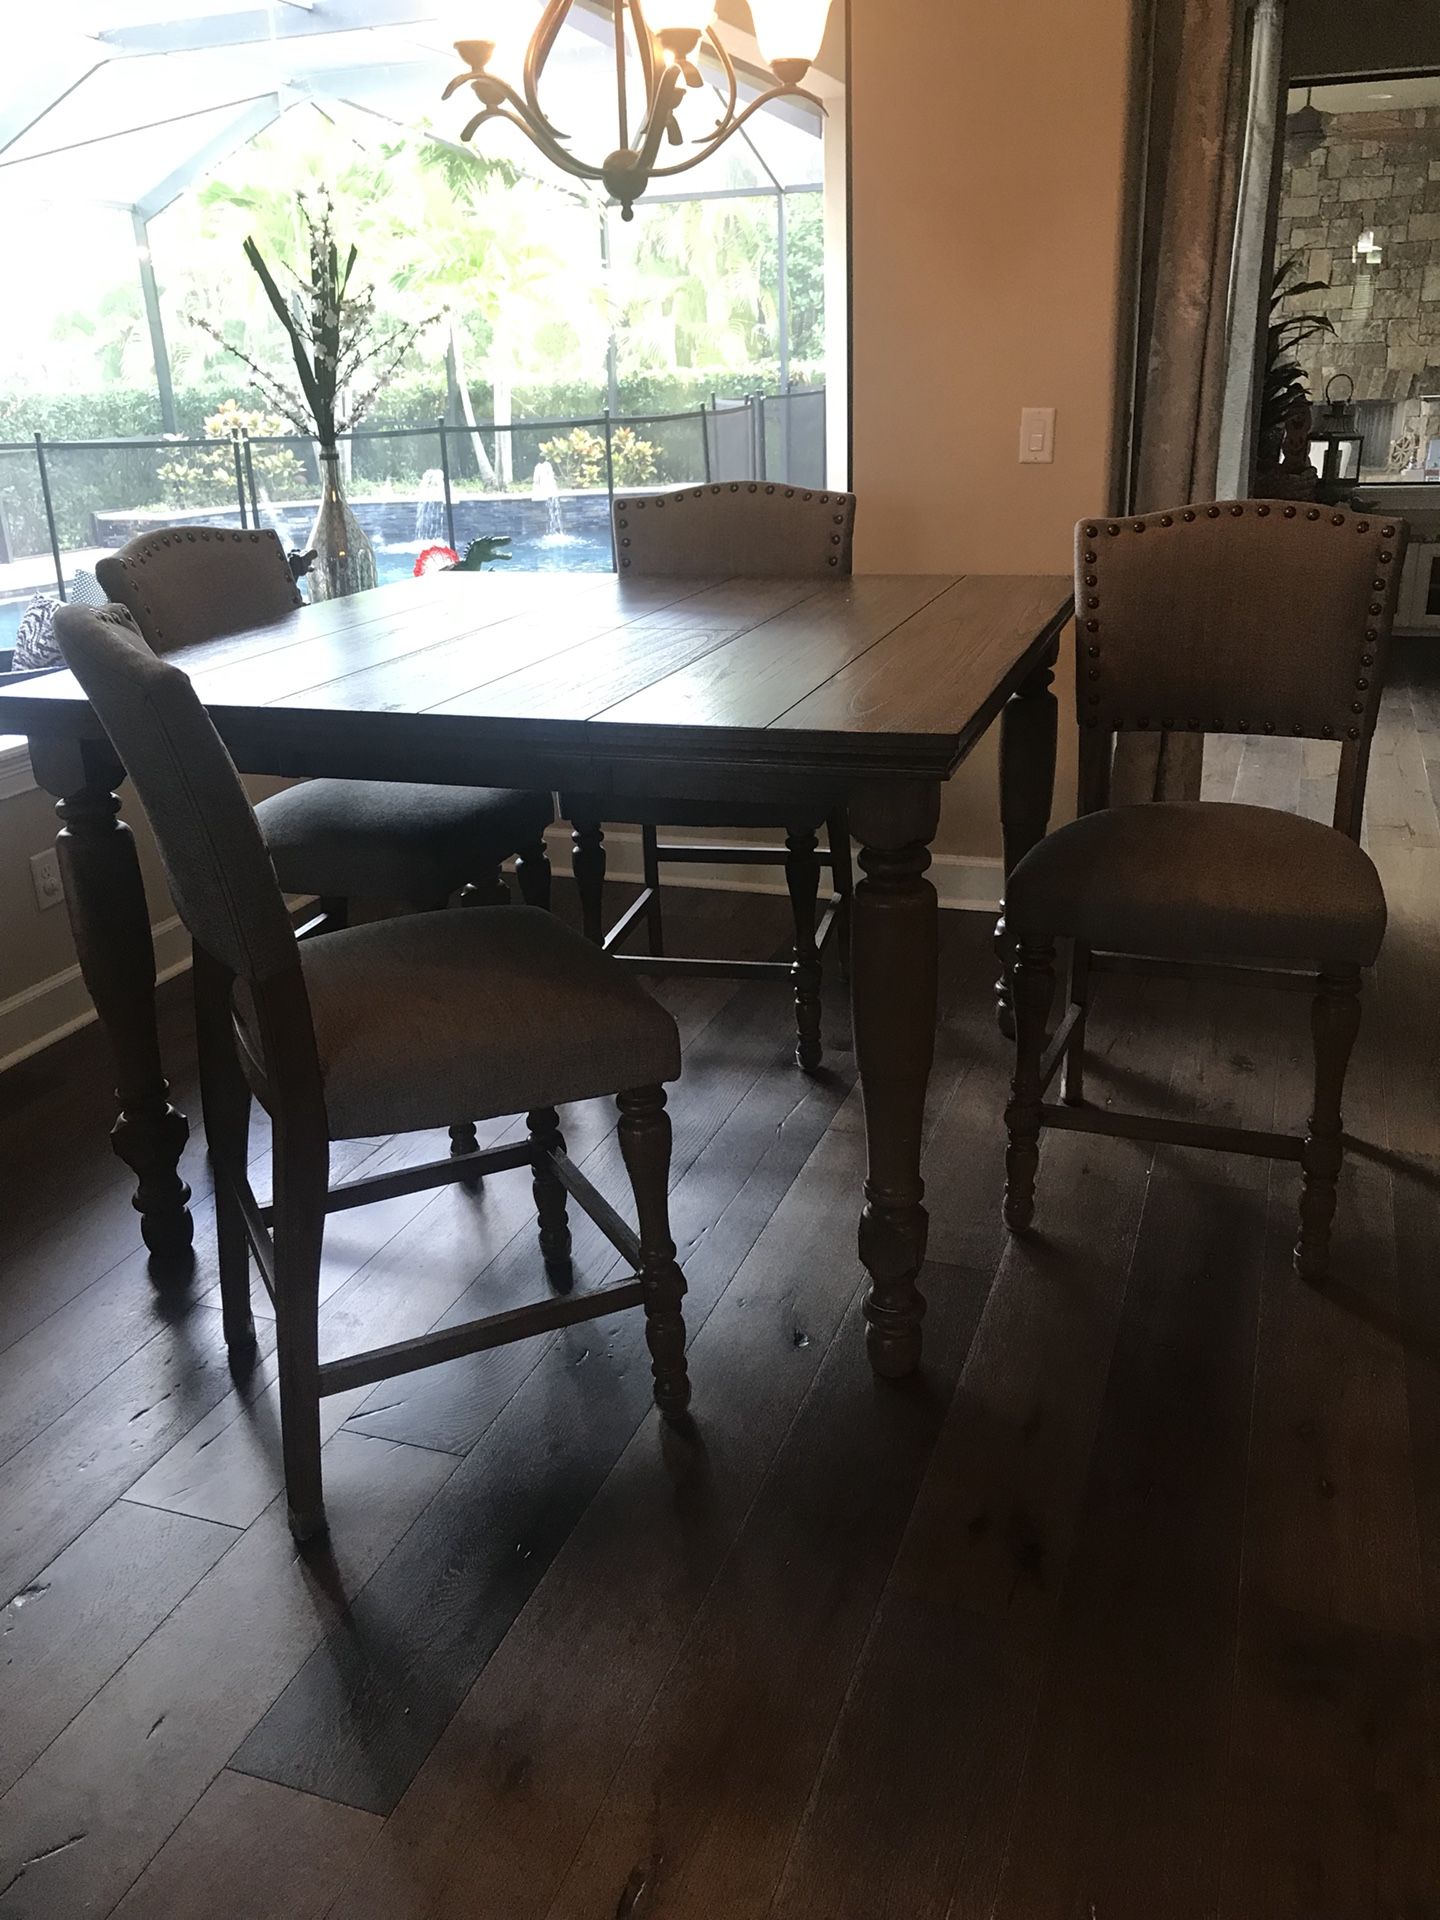 Ashley Furniture counter height table and chairs